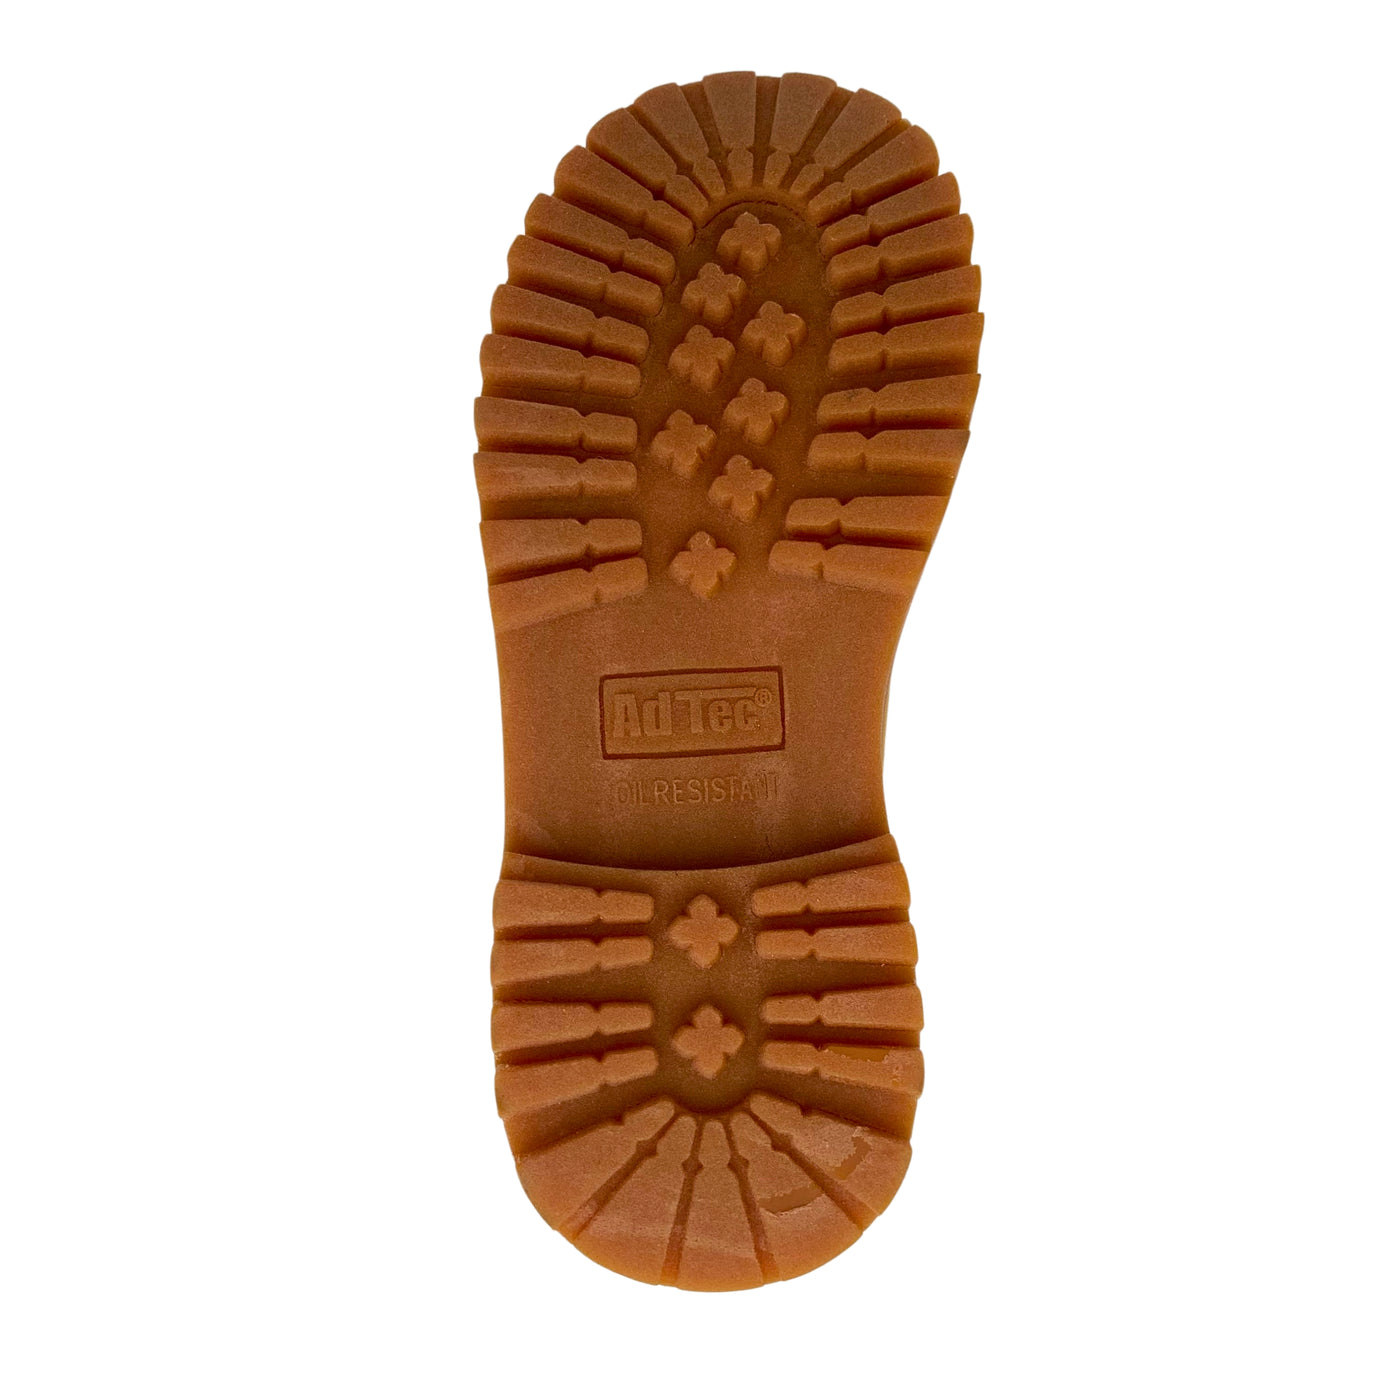 Forester: Kid's Work Boot - Tan 4803